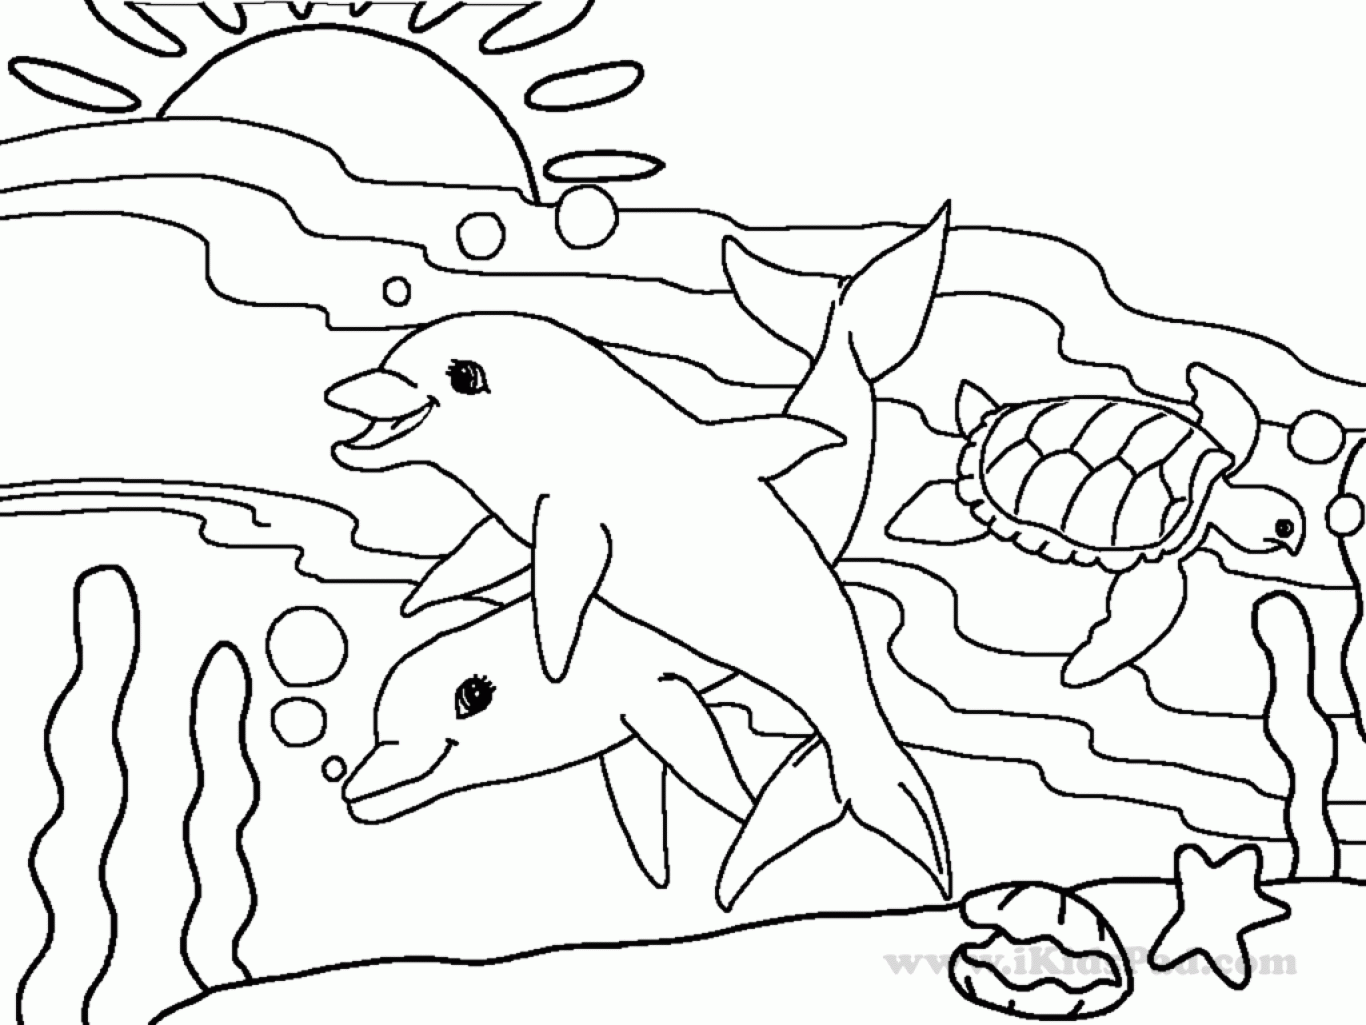 printable-coloring-pages-ocean